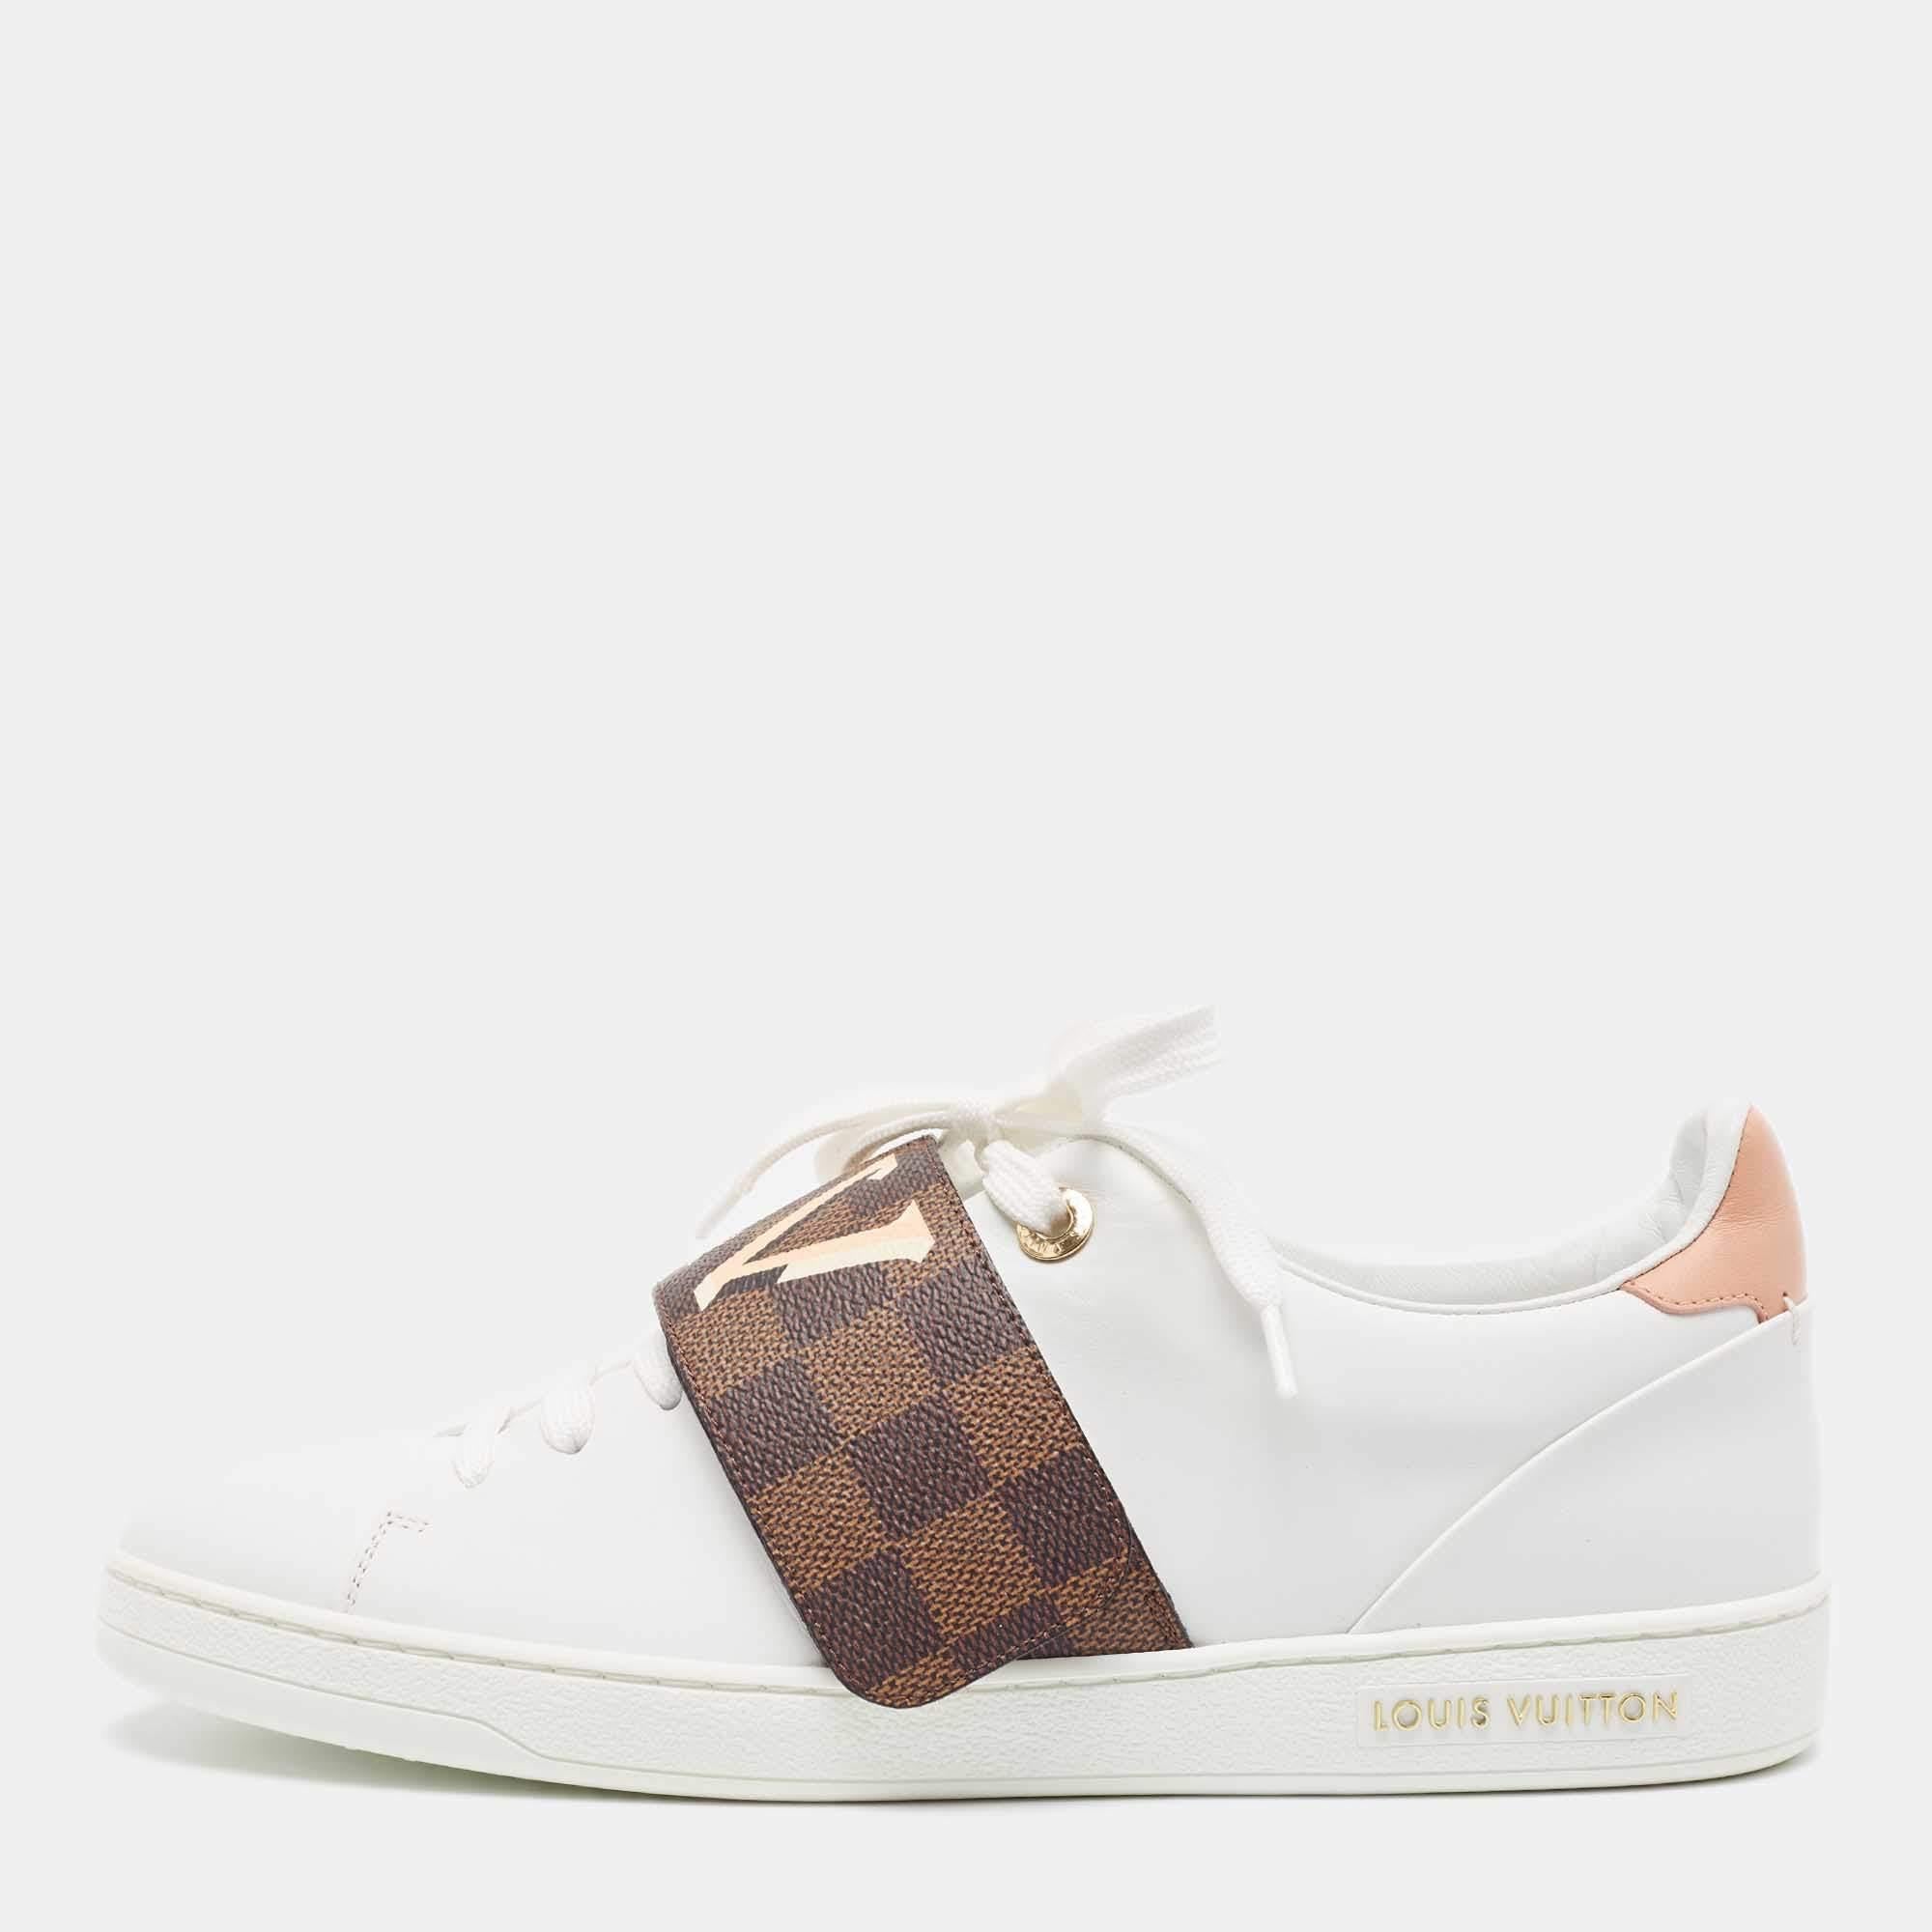 Louis Vuitton White/Monogram Canvas and Leather Frontrow Sneakers Size 40 5